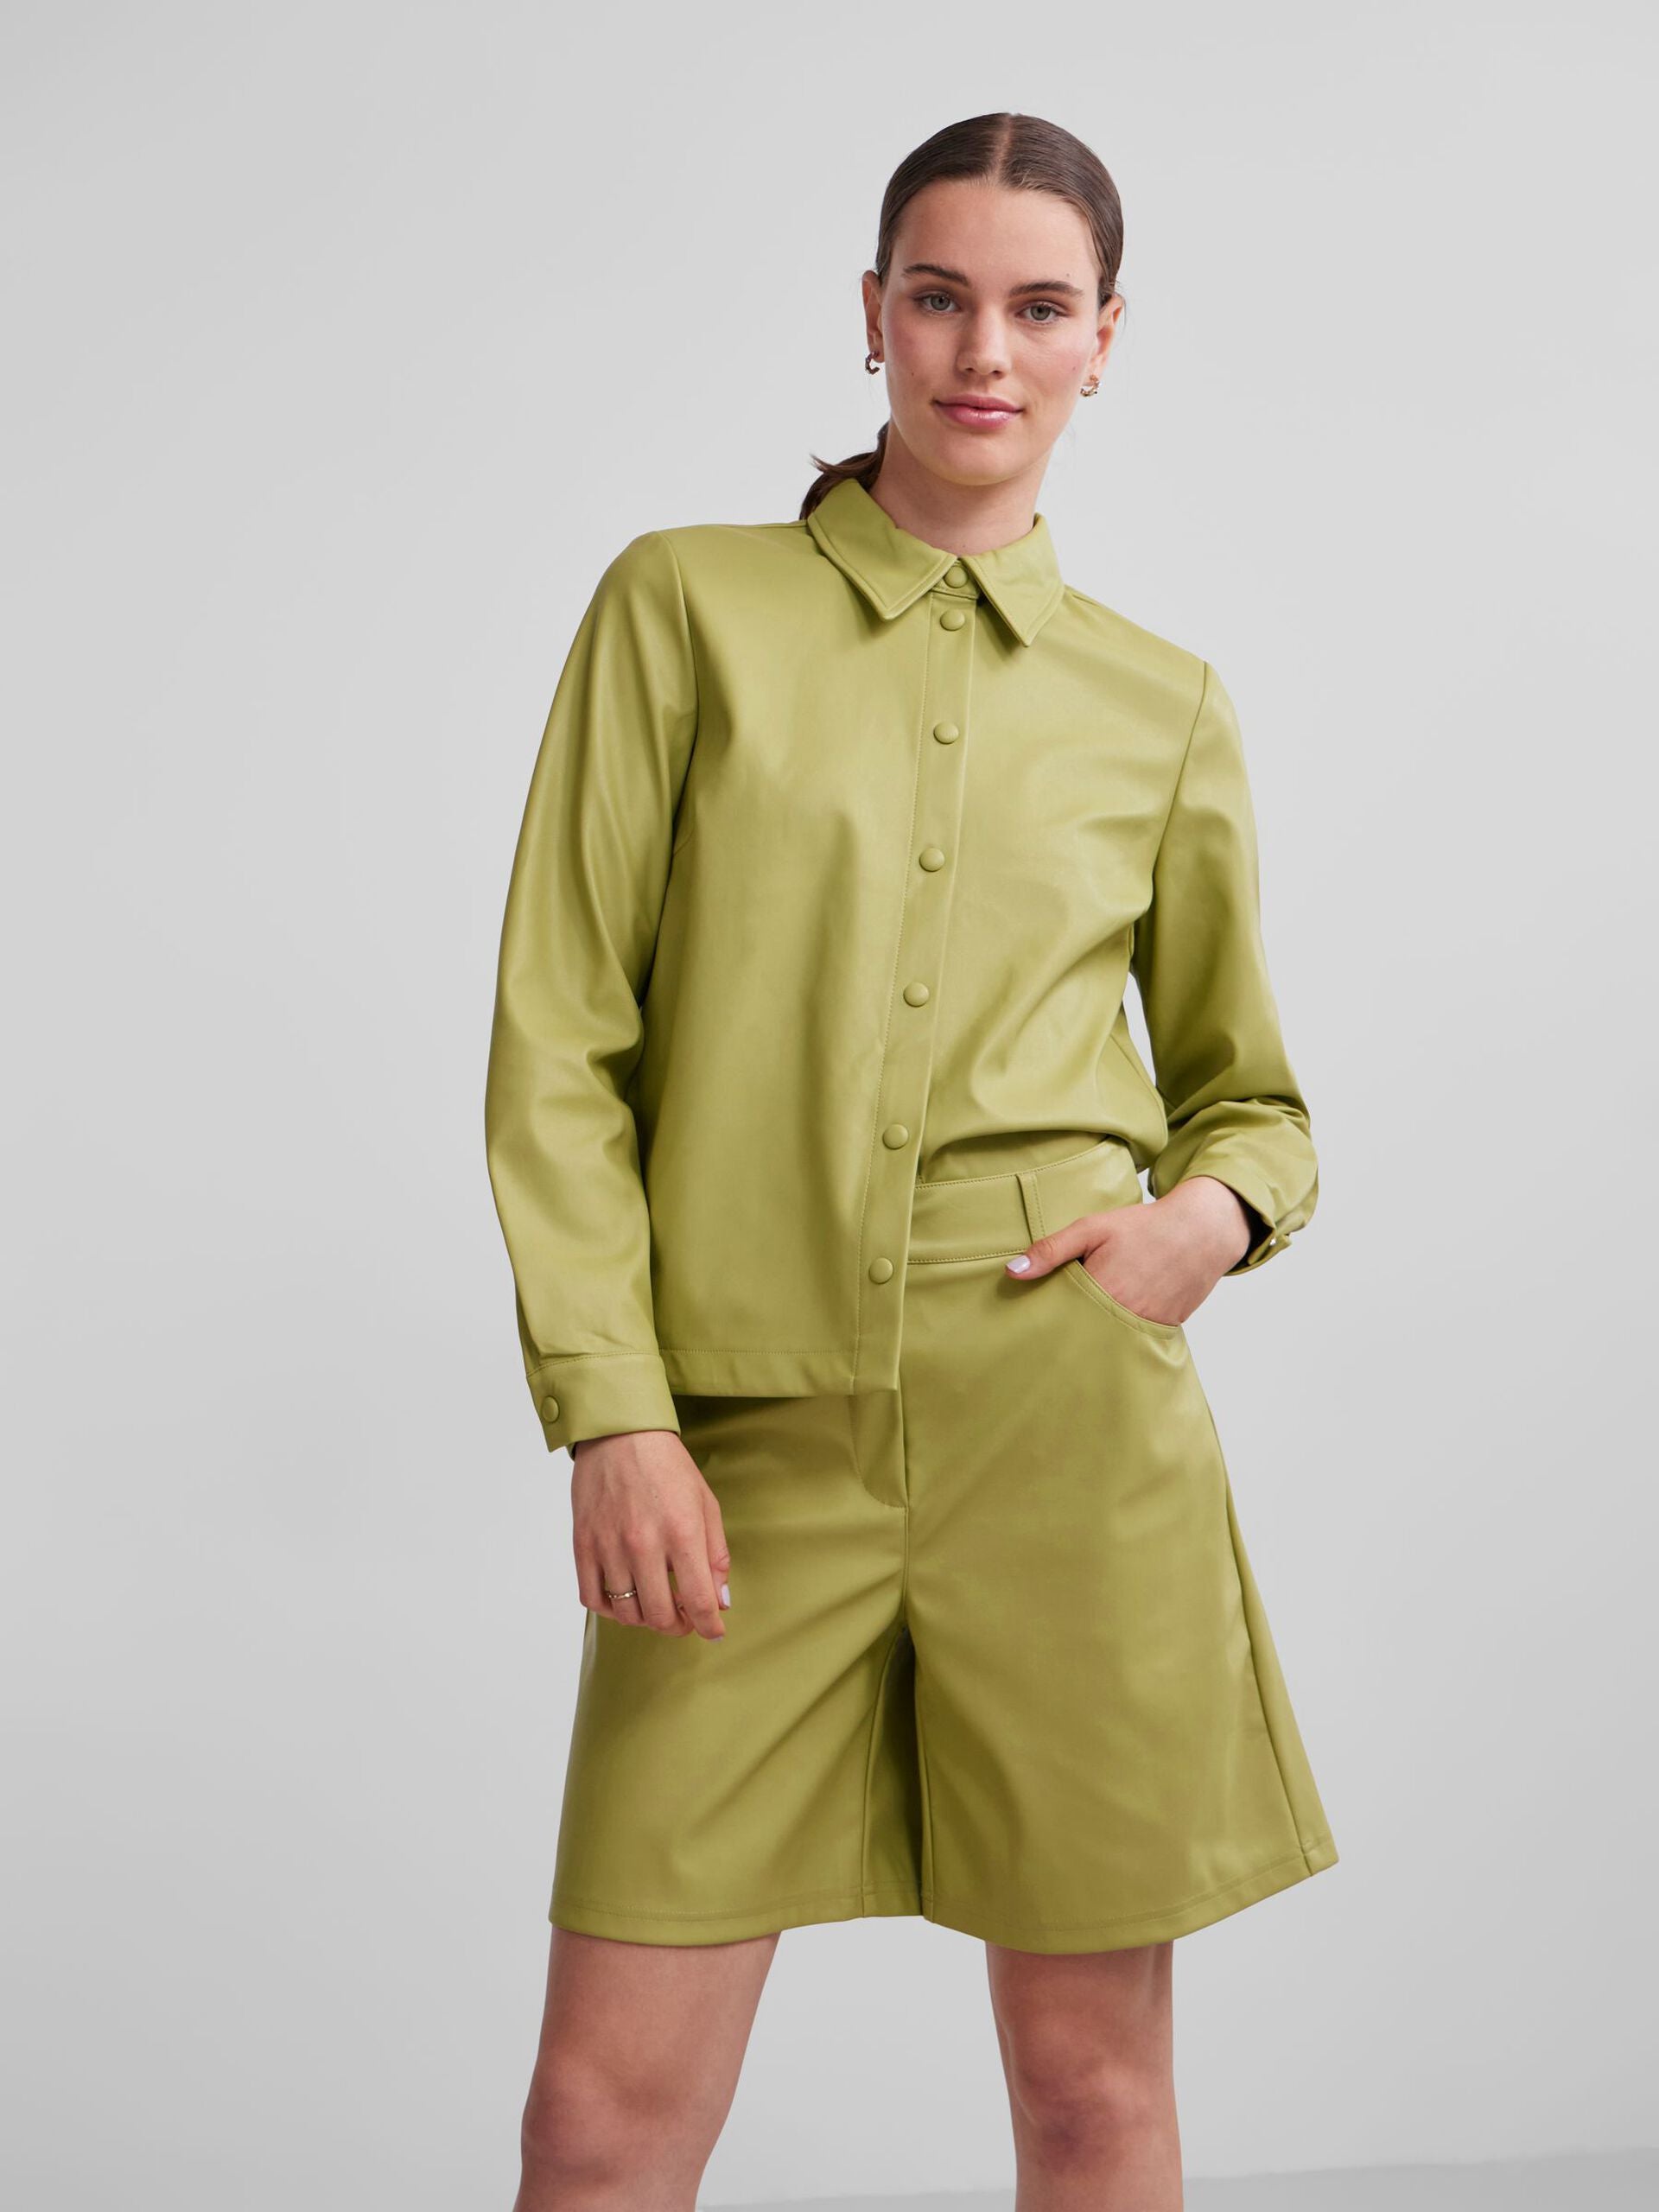 Pieces green leather shirt